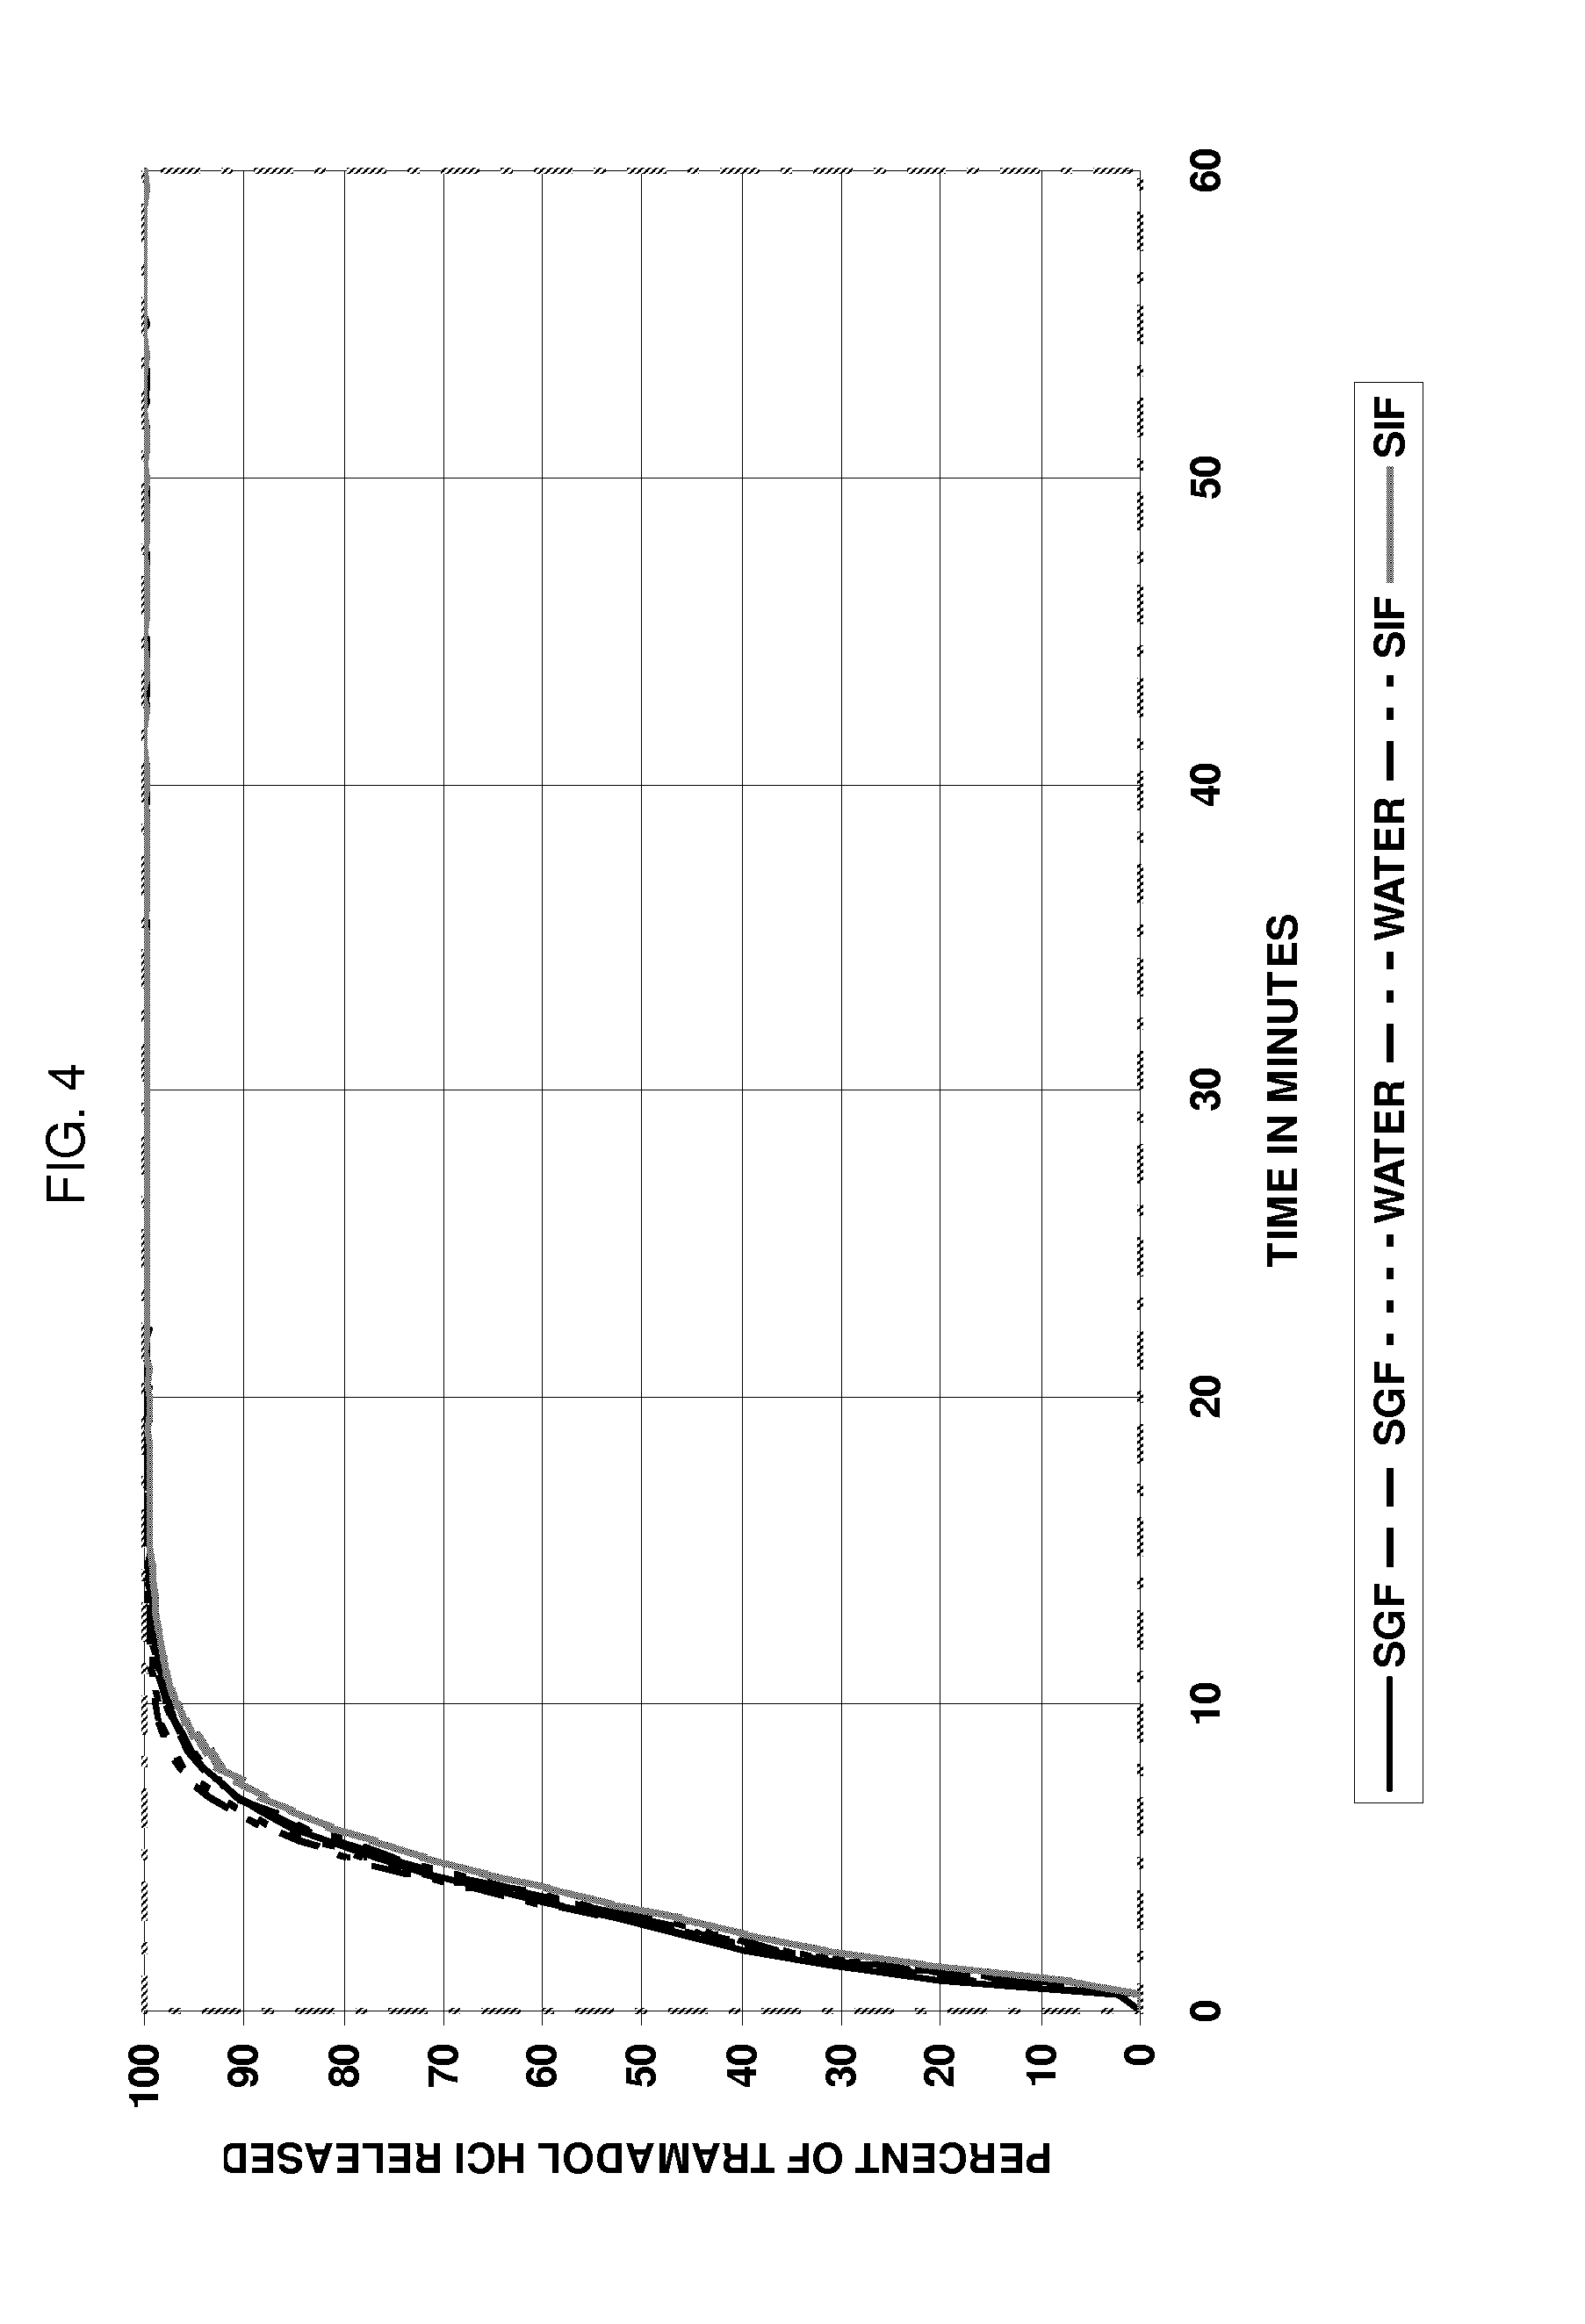 Multiparticulate formulation having tramadol in immediate and controlled release form